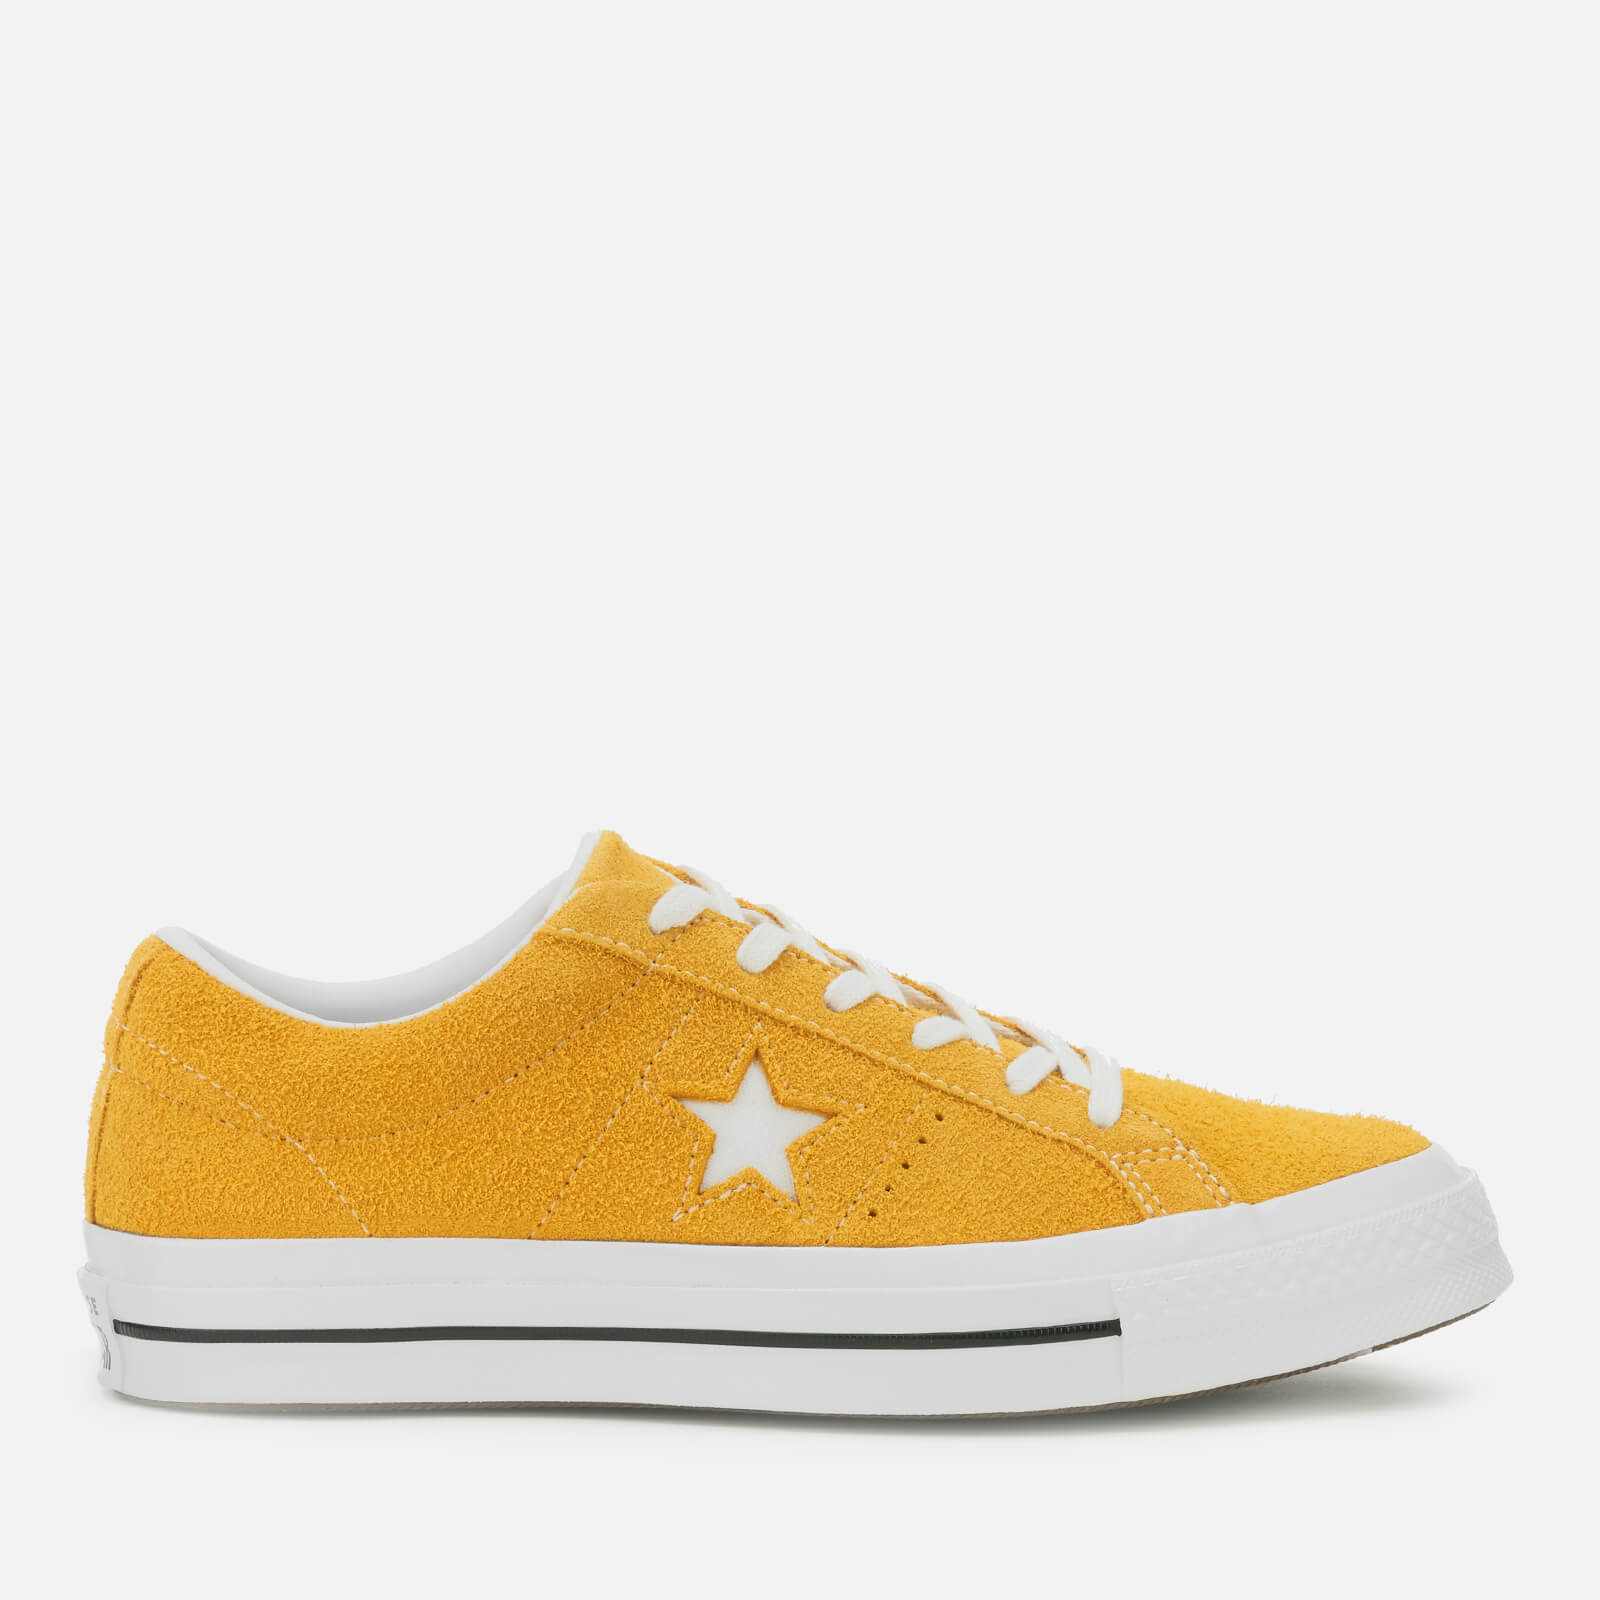 converse one star ox yellow suede